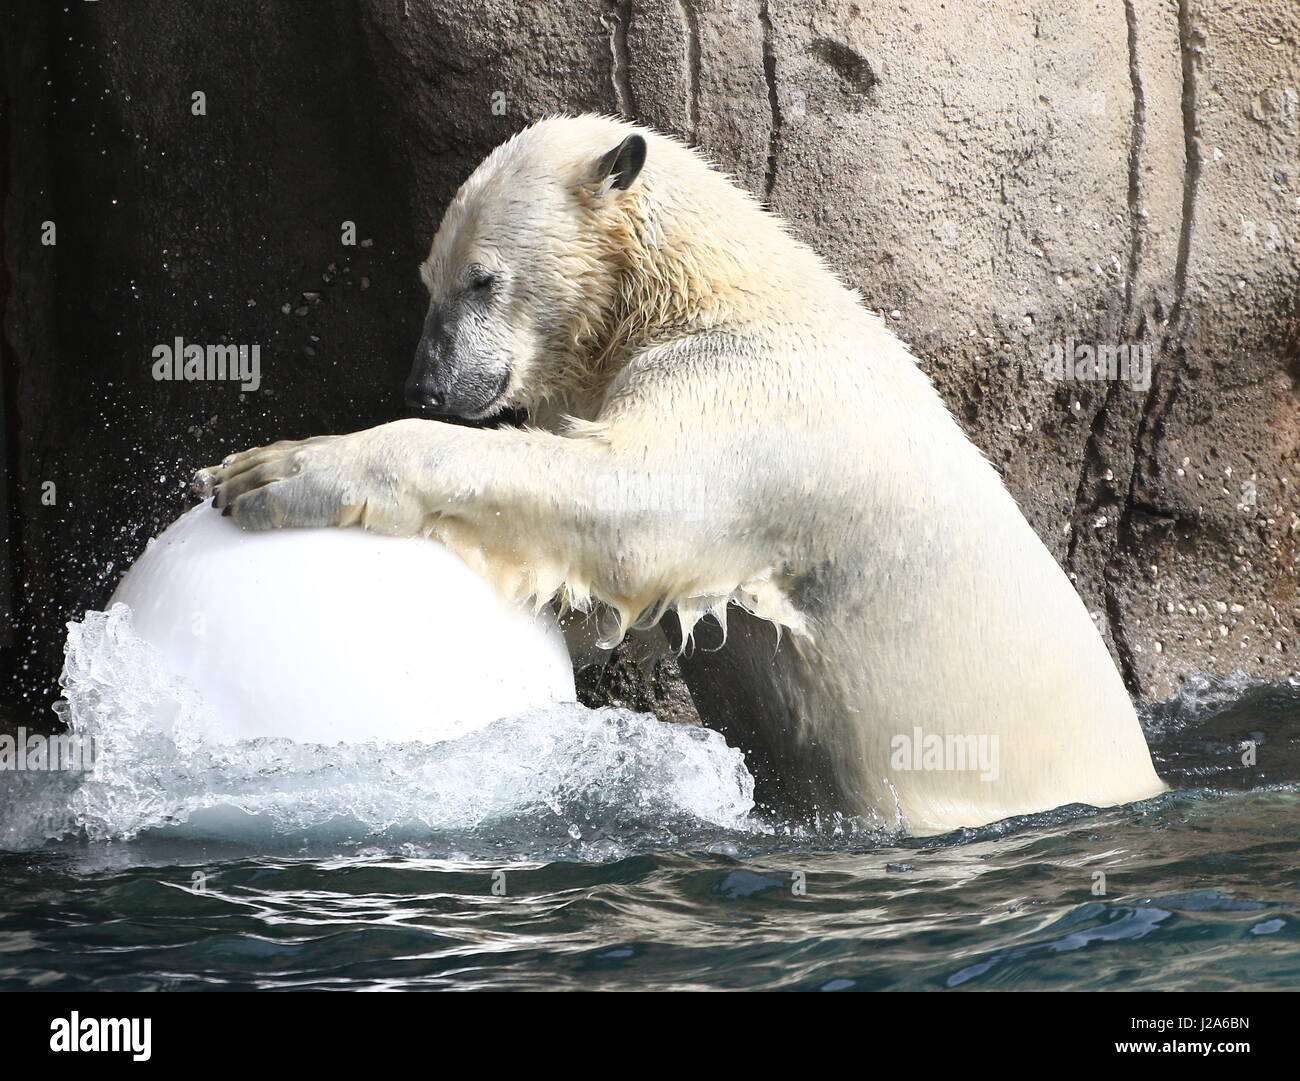 Polar bear (Ursus maritimus) playing with a large plastic ball at Rotterdam Blijdorp Zoo, The Netherlands Stock Photo